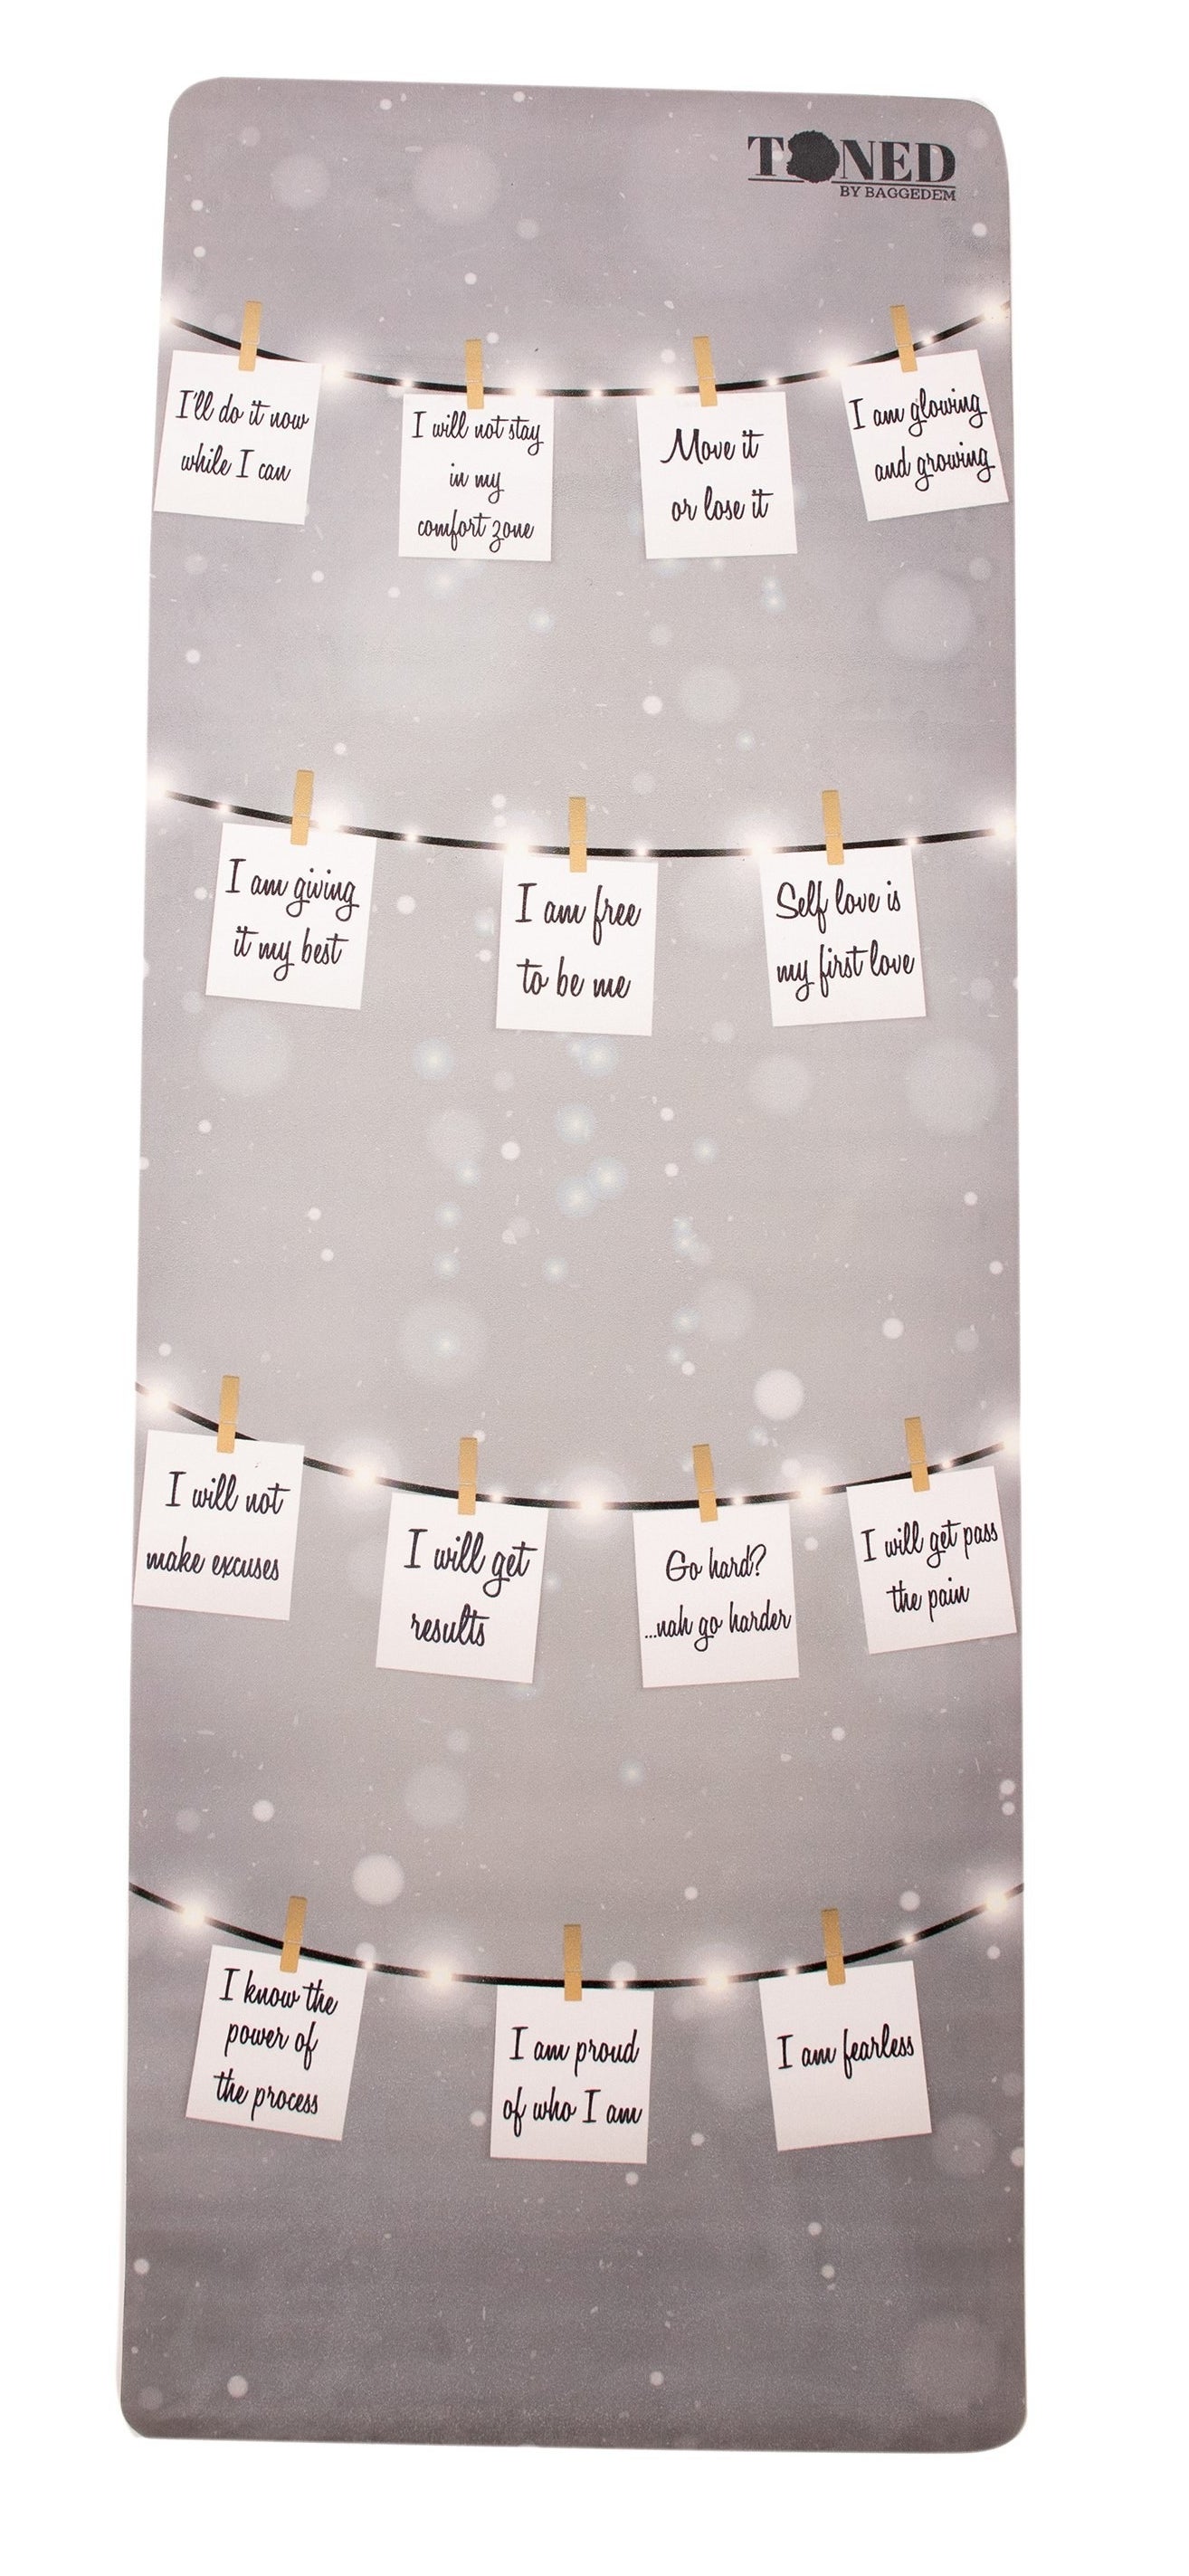 the gray affirmations mat with positive messages illustrated on stick notes on the mat